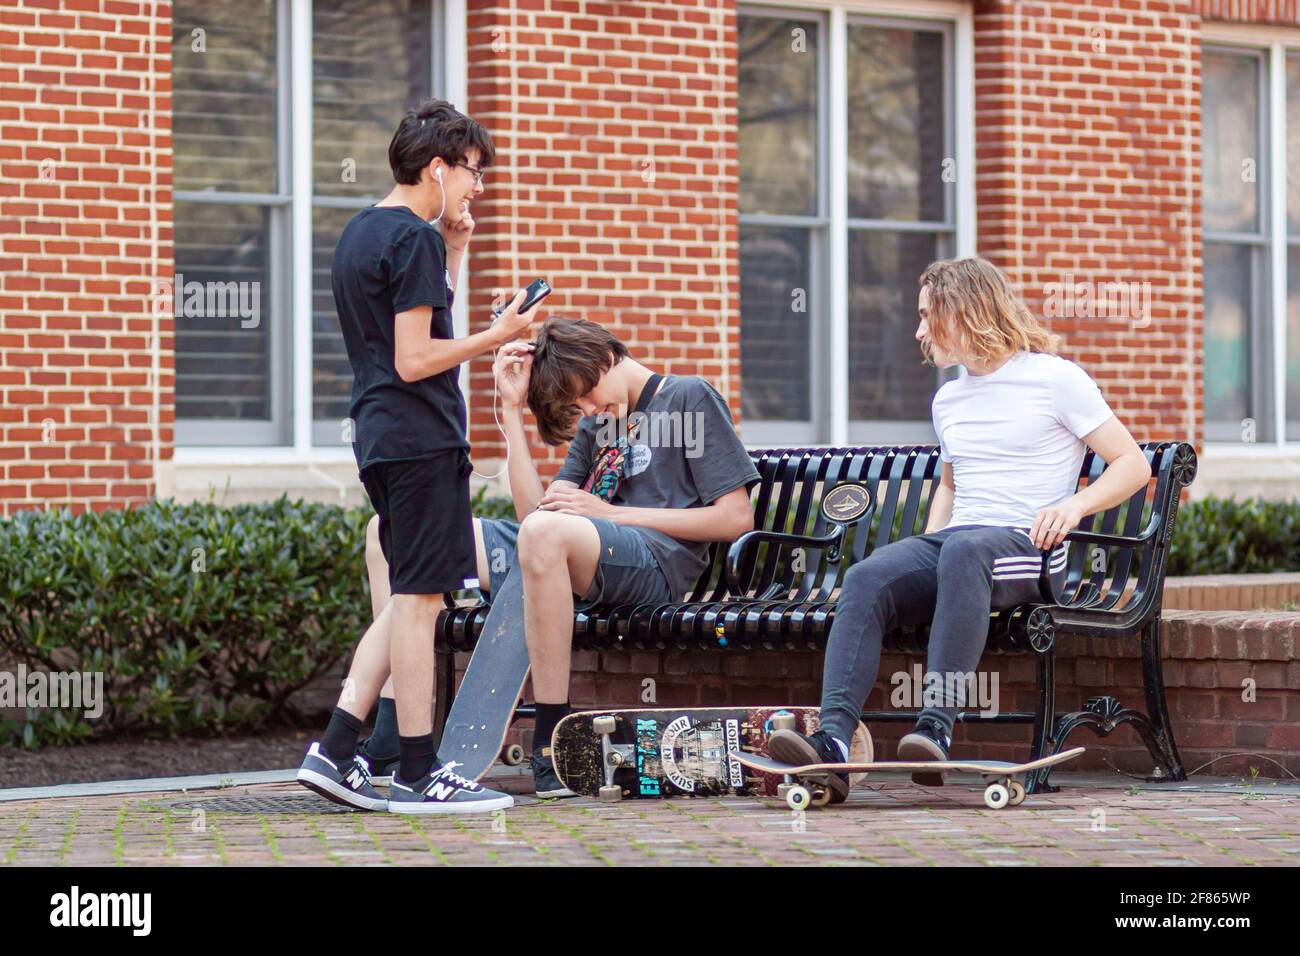 Frederick, MD, USA 04-07-2021: Three teenager boys wearing casual trendy clothes are hanging out in a city park on a sunny day. Concept image for gene Stock Photo